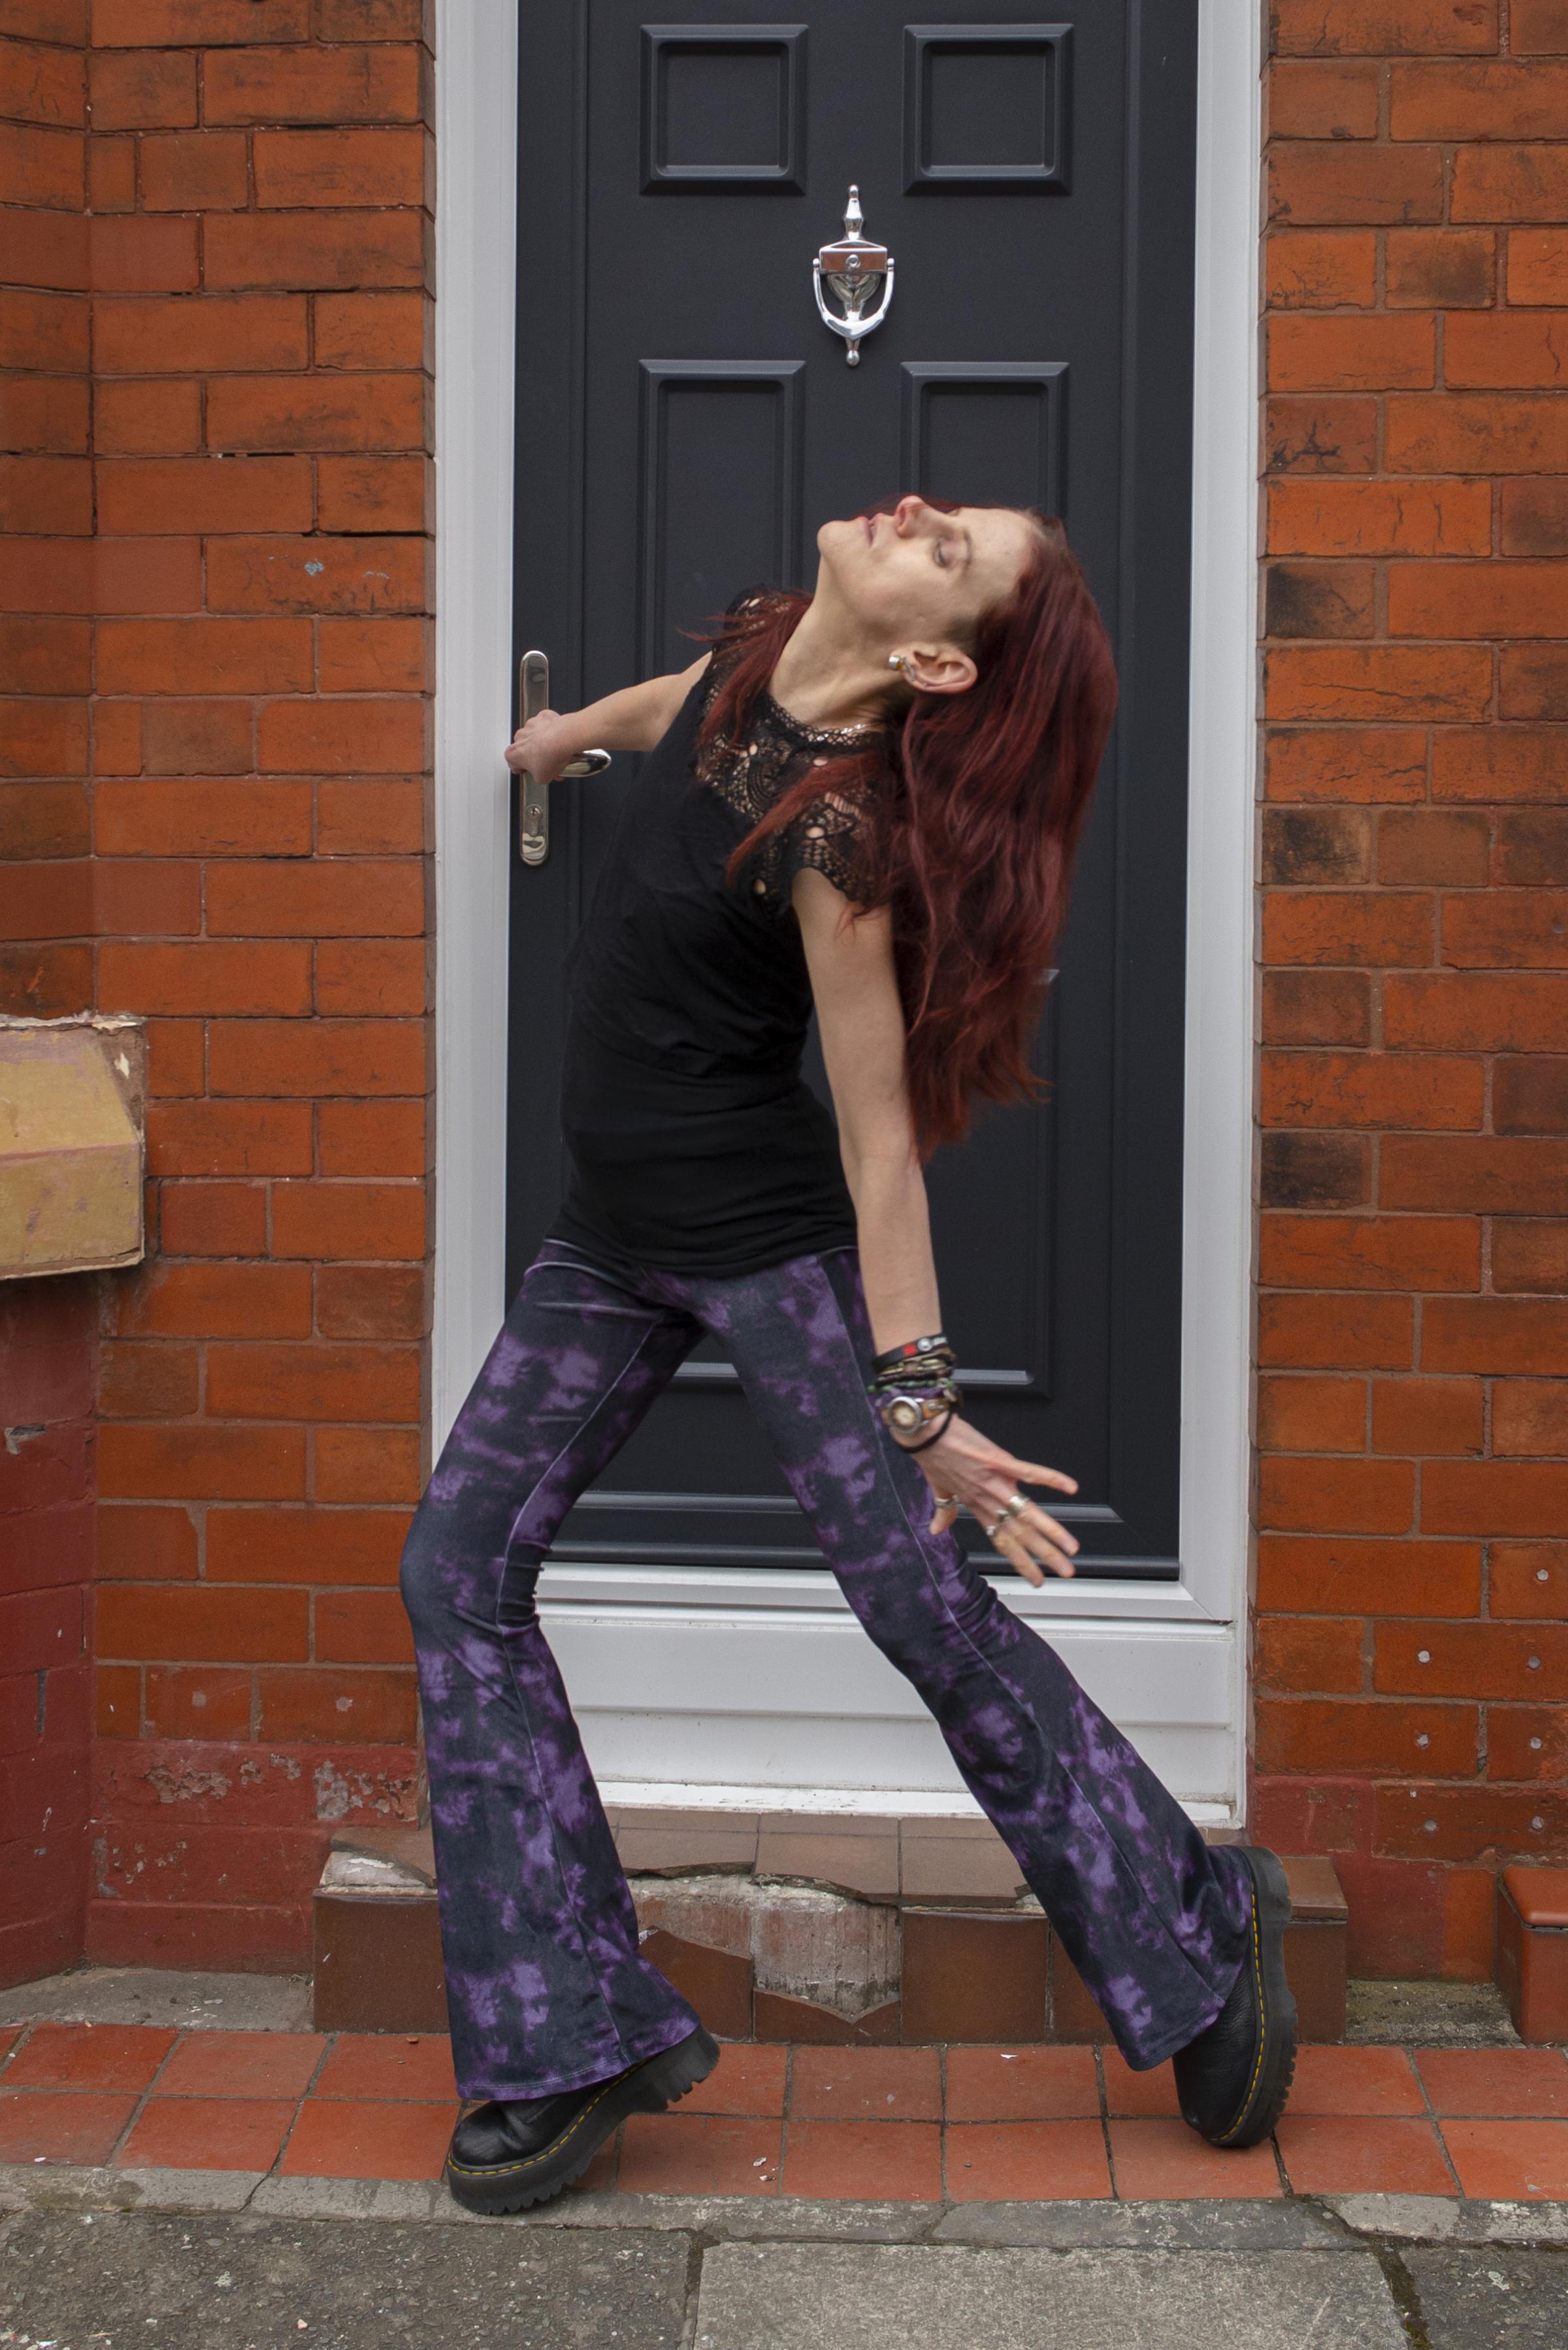 Dancers from Fallen Angels Dance Theatre explore how doorways become a metaphor for the times we live in. Dancers involved were from Cheshire, Merseyside and Leigh, Greater Manchester. Picture credit: Jazamin Sinclair.